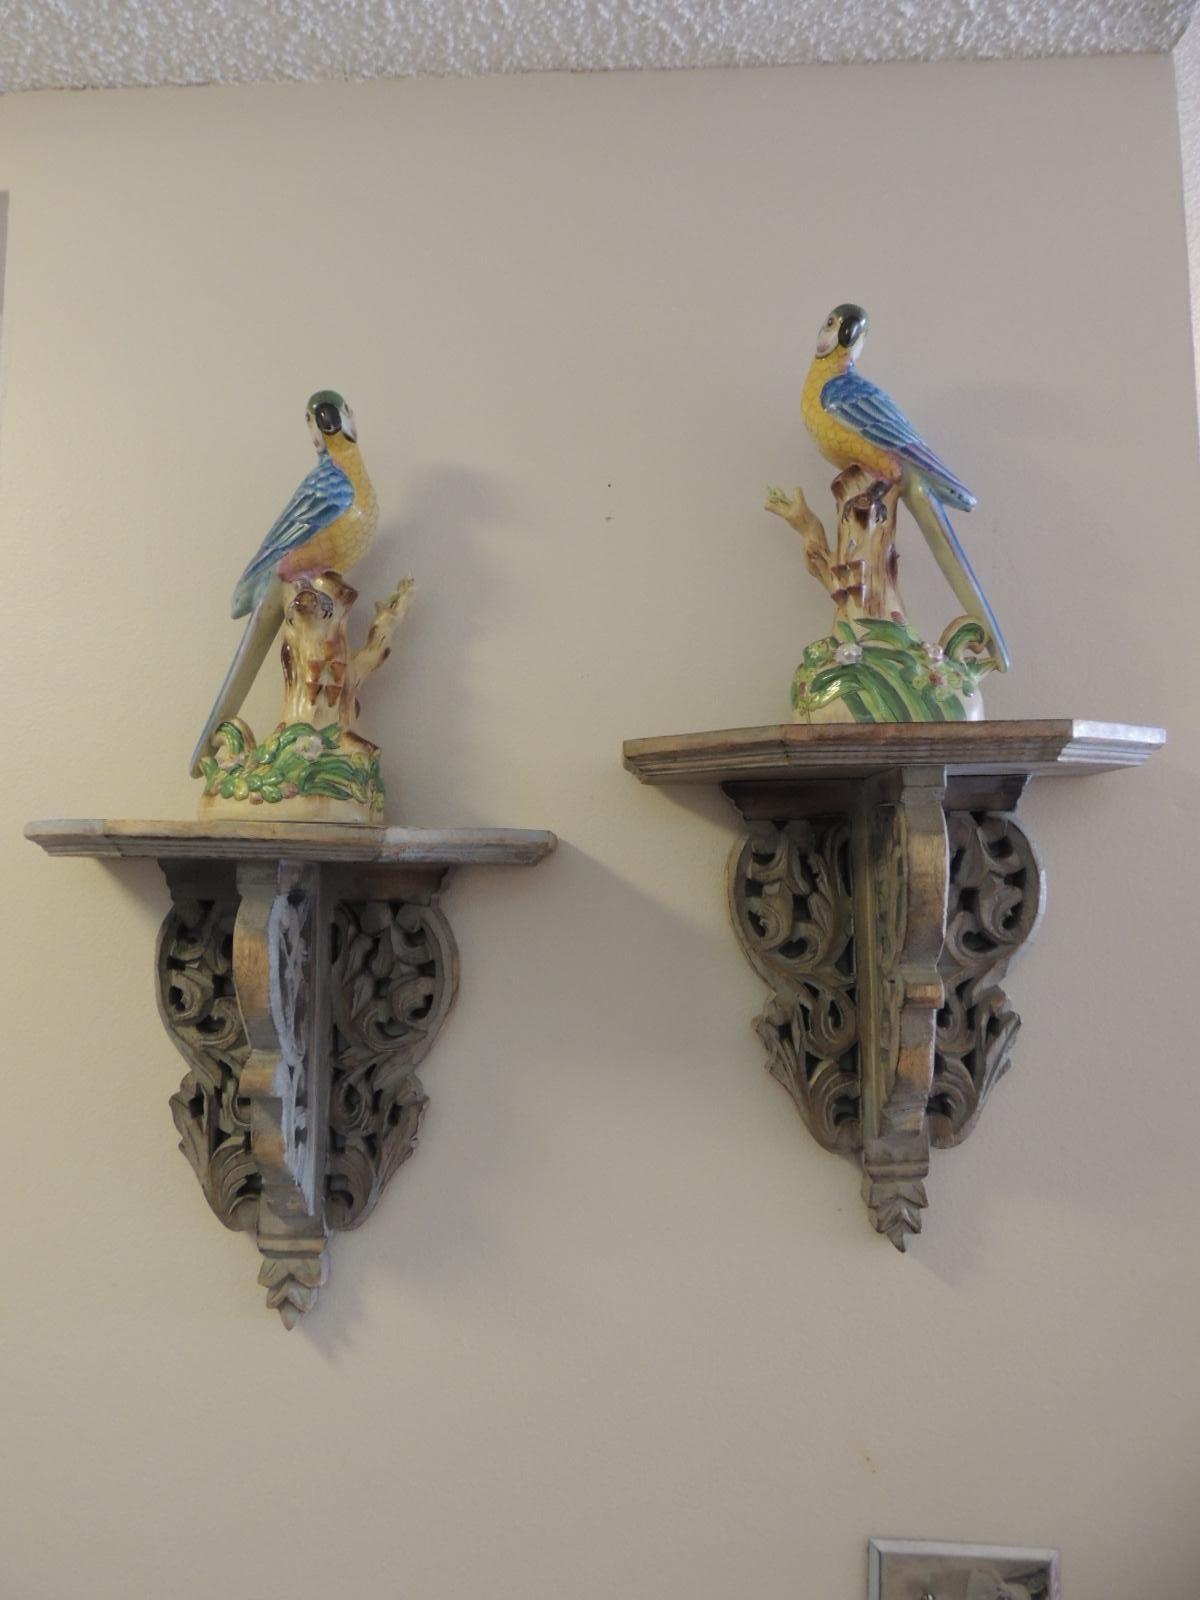 Pair of vintage Chinese Export hand-painted parrots on wood brackets.
Pair of intricate hand-painted detailed ceramic Chinese Export parrots. The flowers, the tree trunks and the birds have a real life feel. In shades of yellow, blue, pink, green,